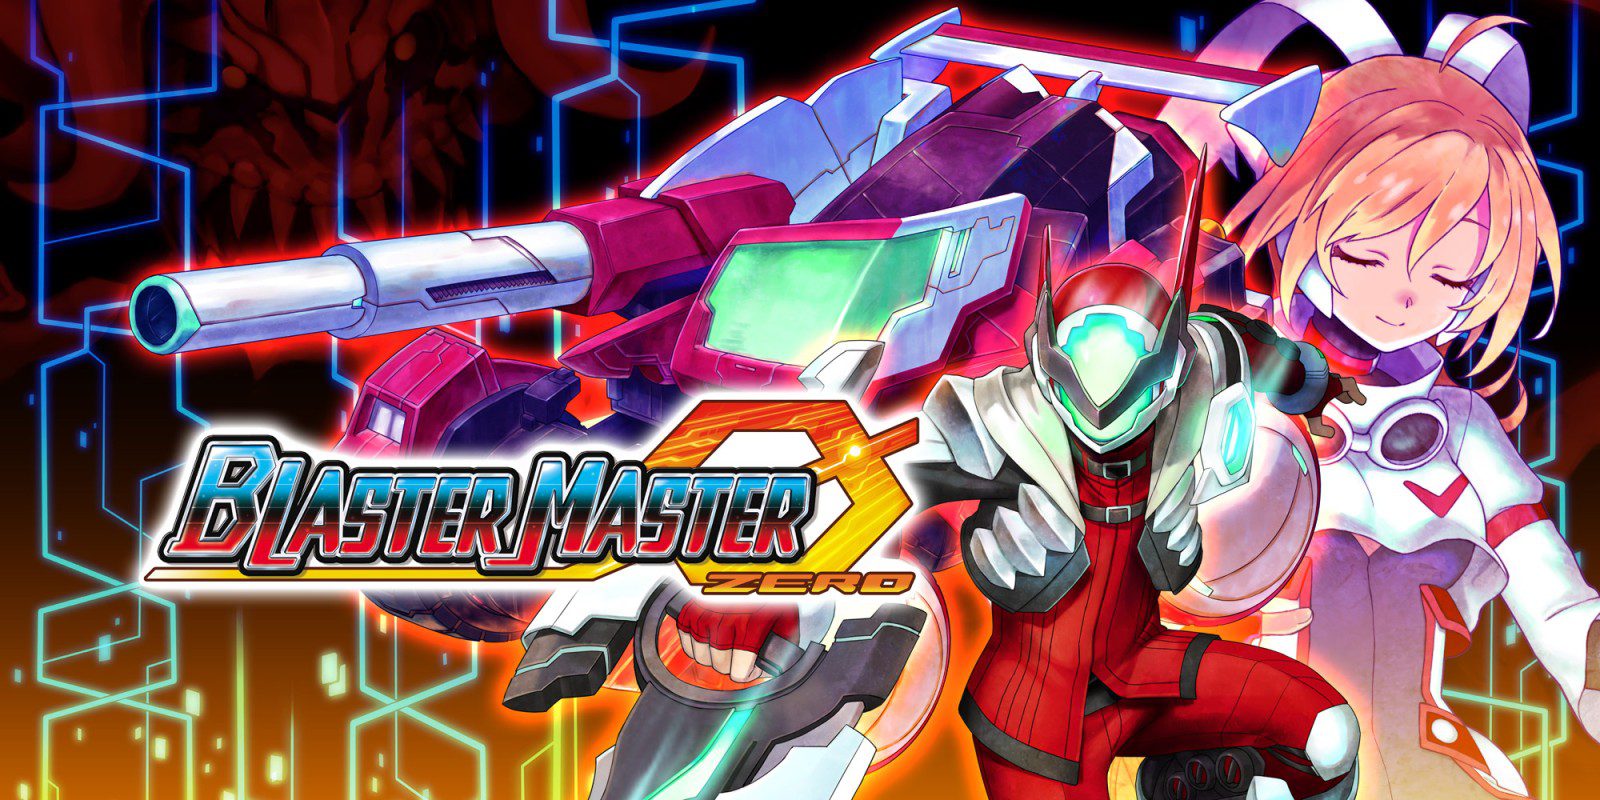 Blaster Master Zero review: you can go home again